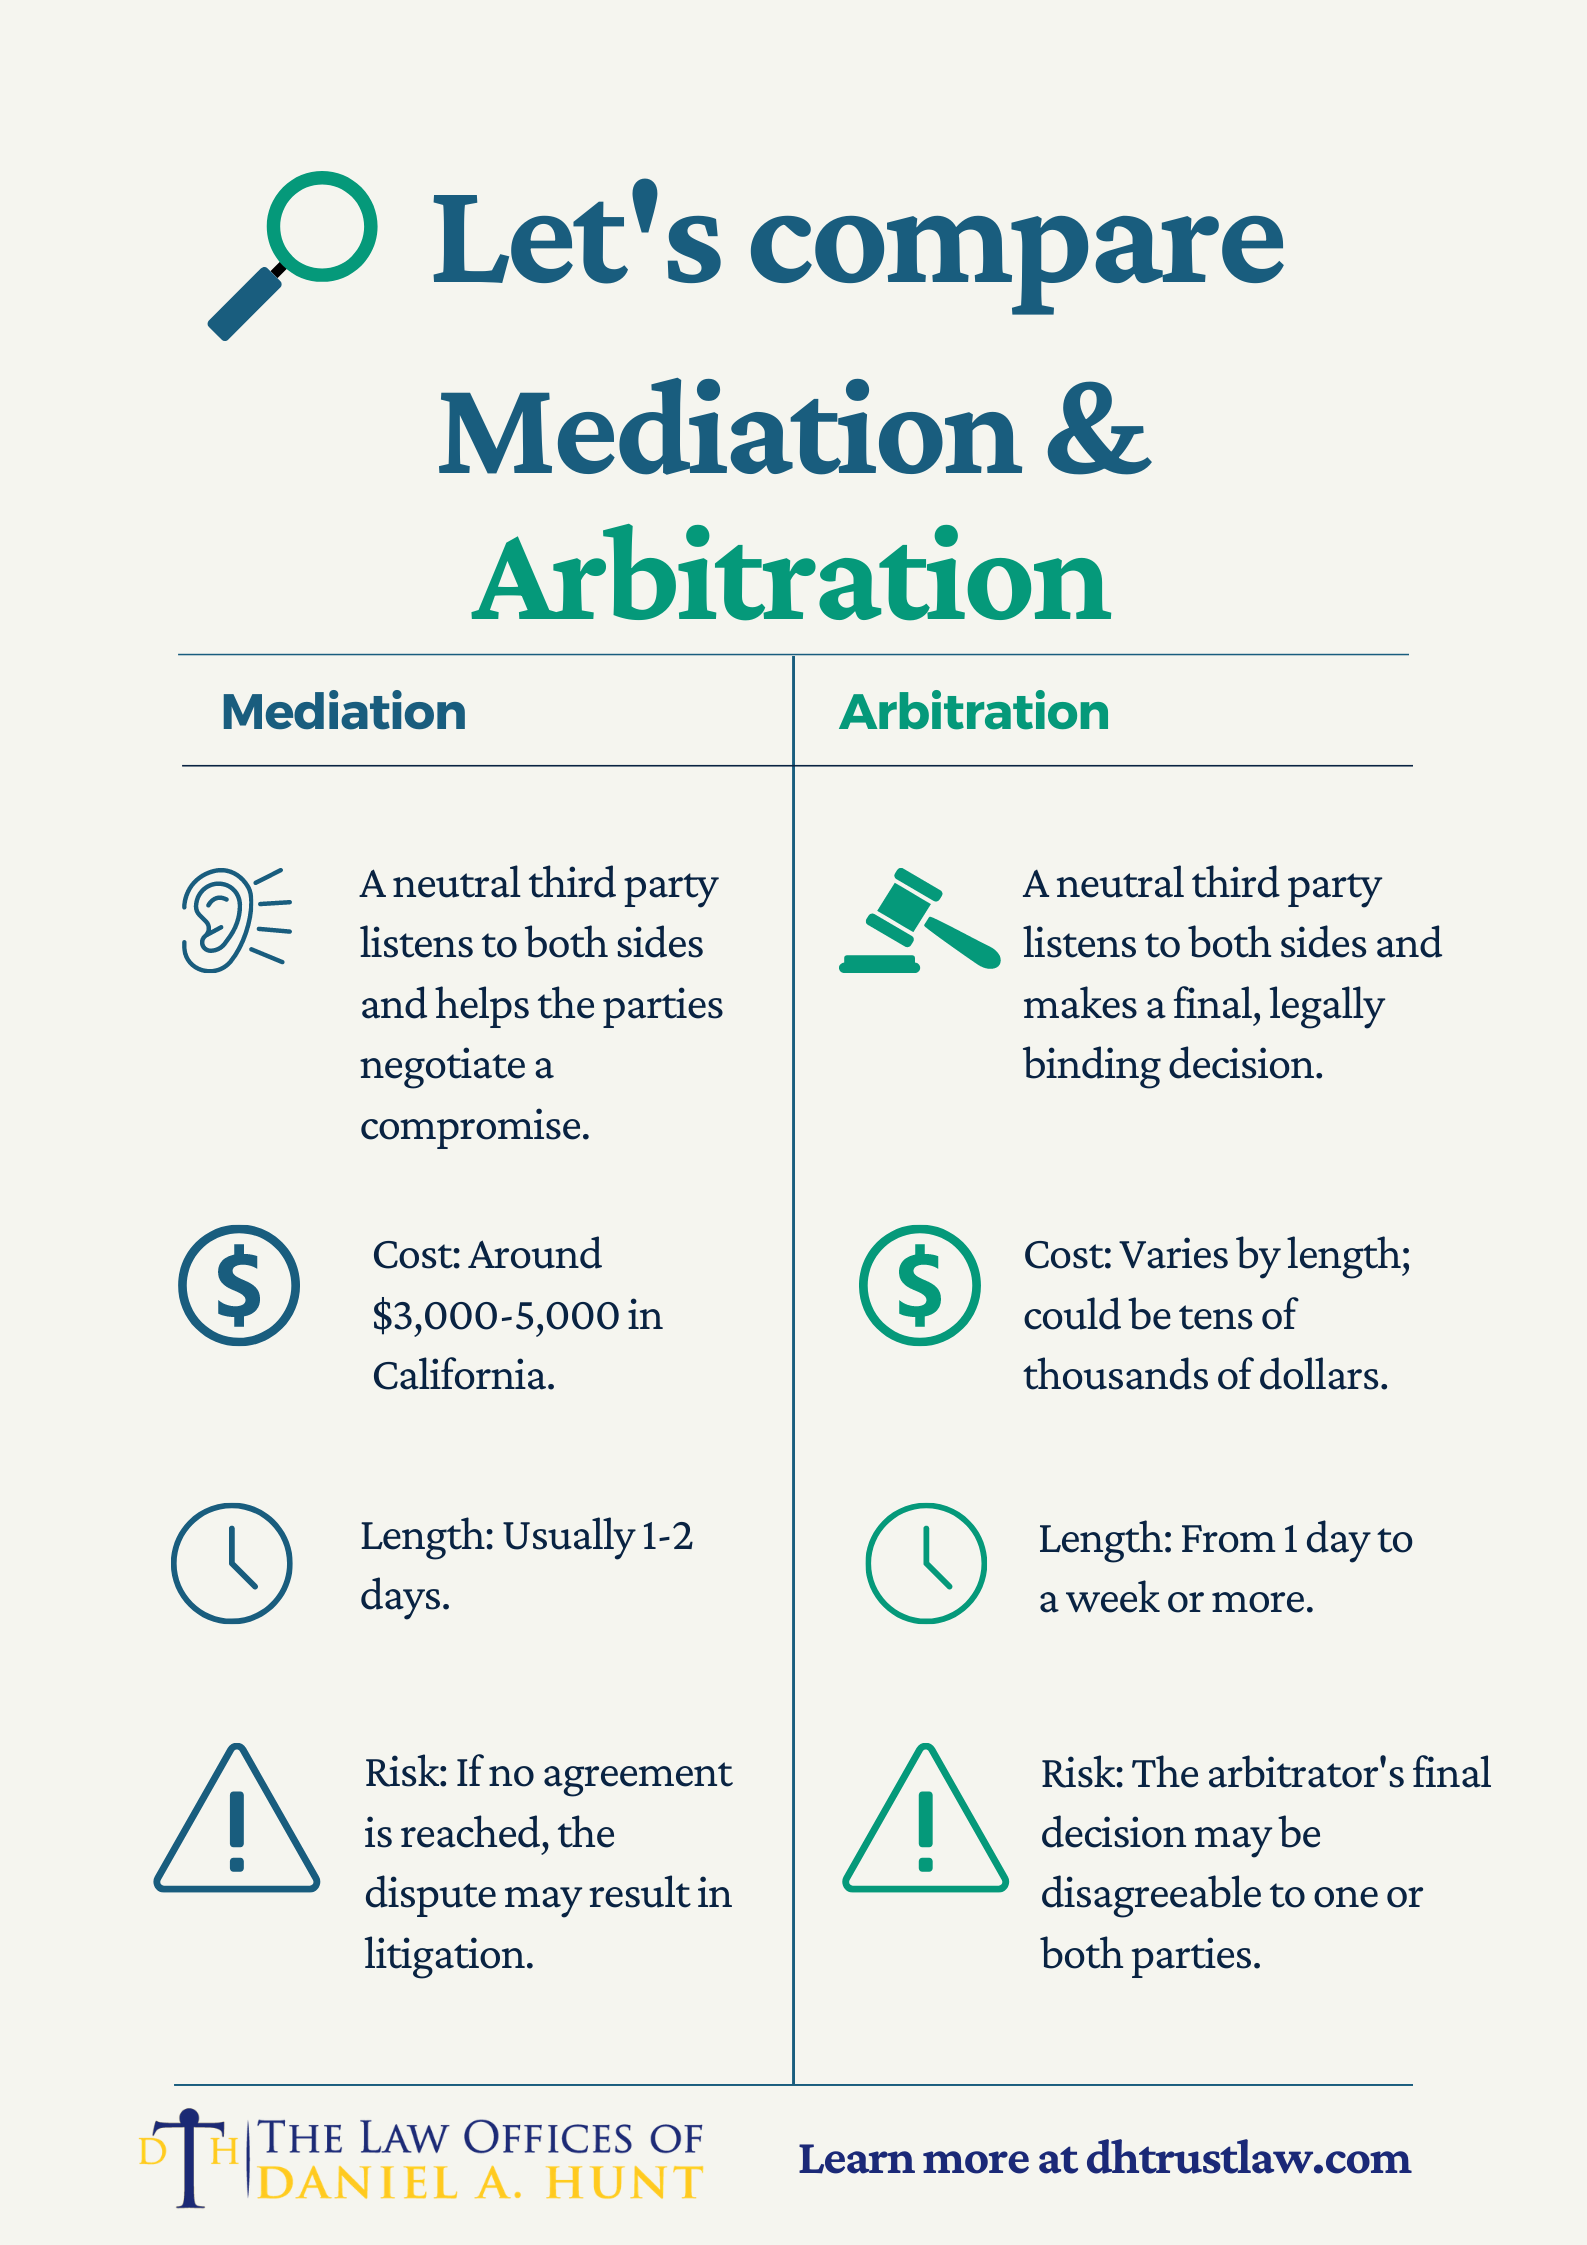 Is Mediation Legally Binding?